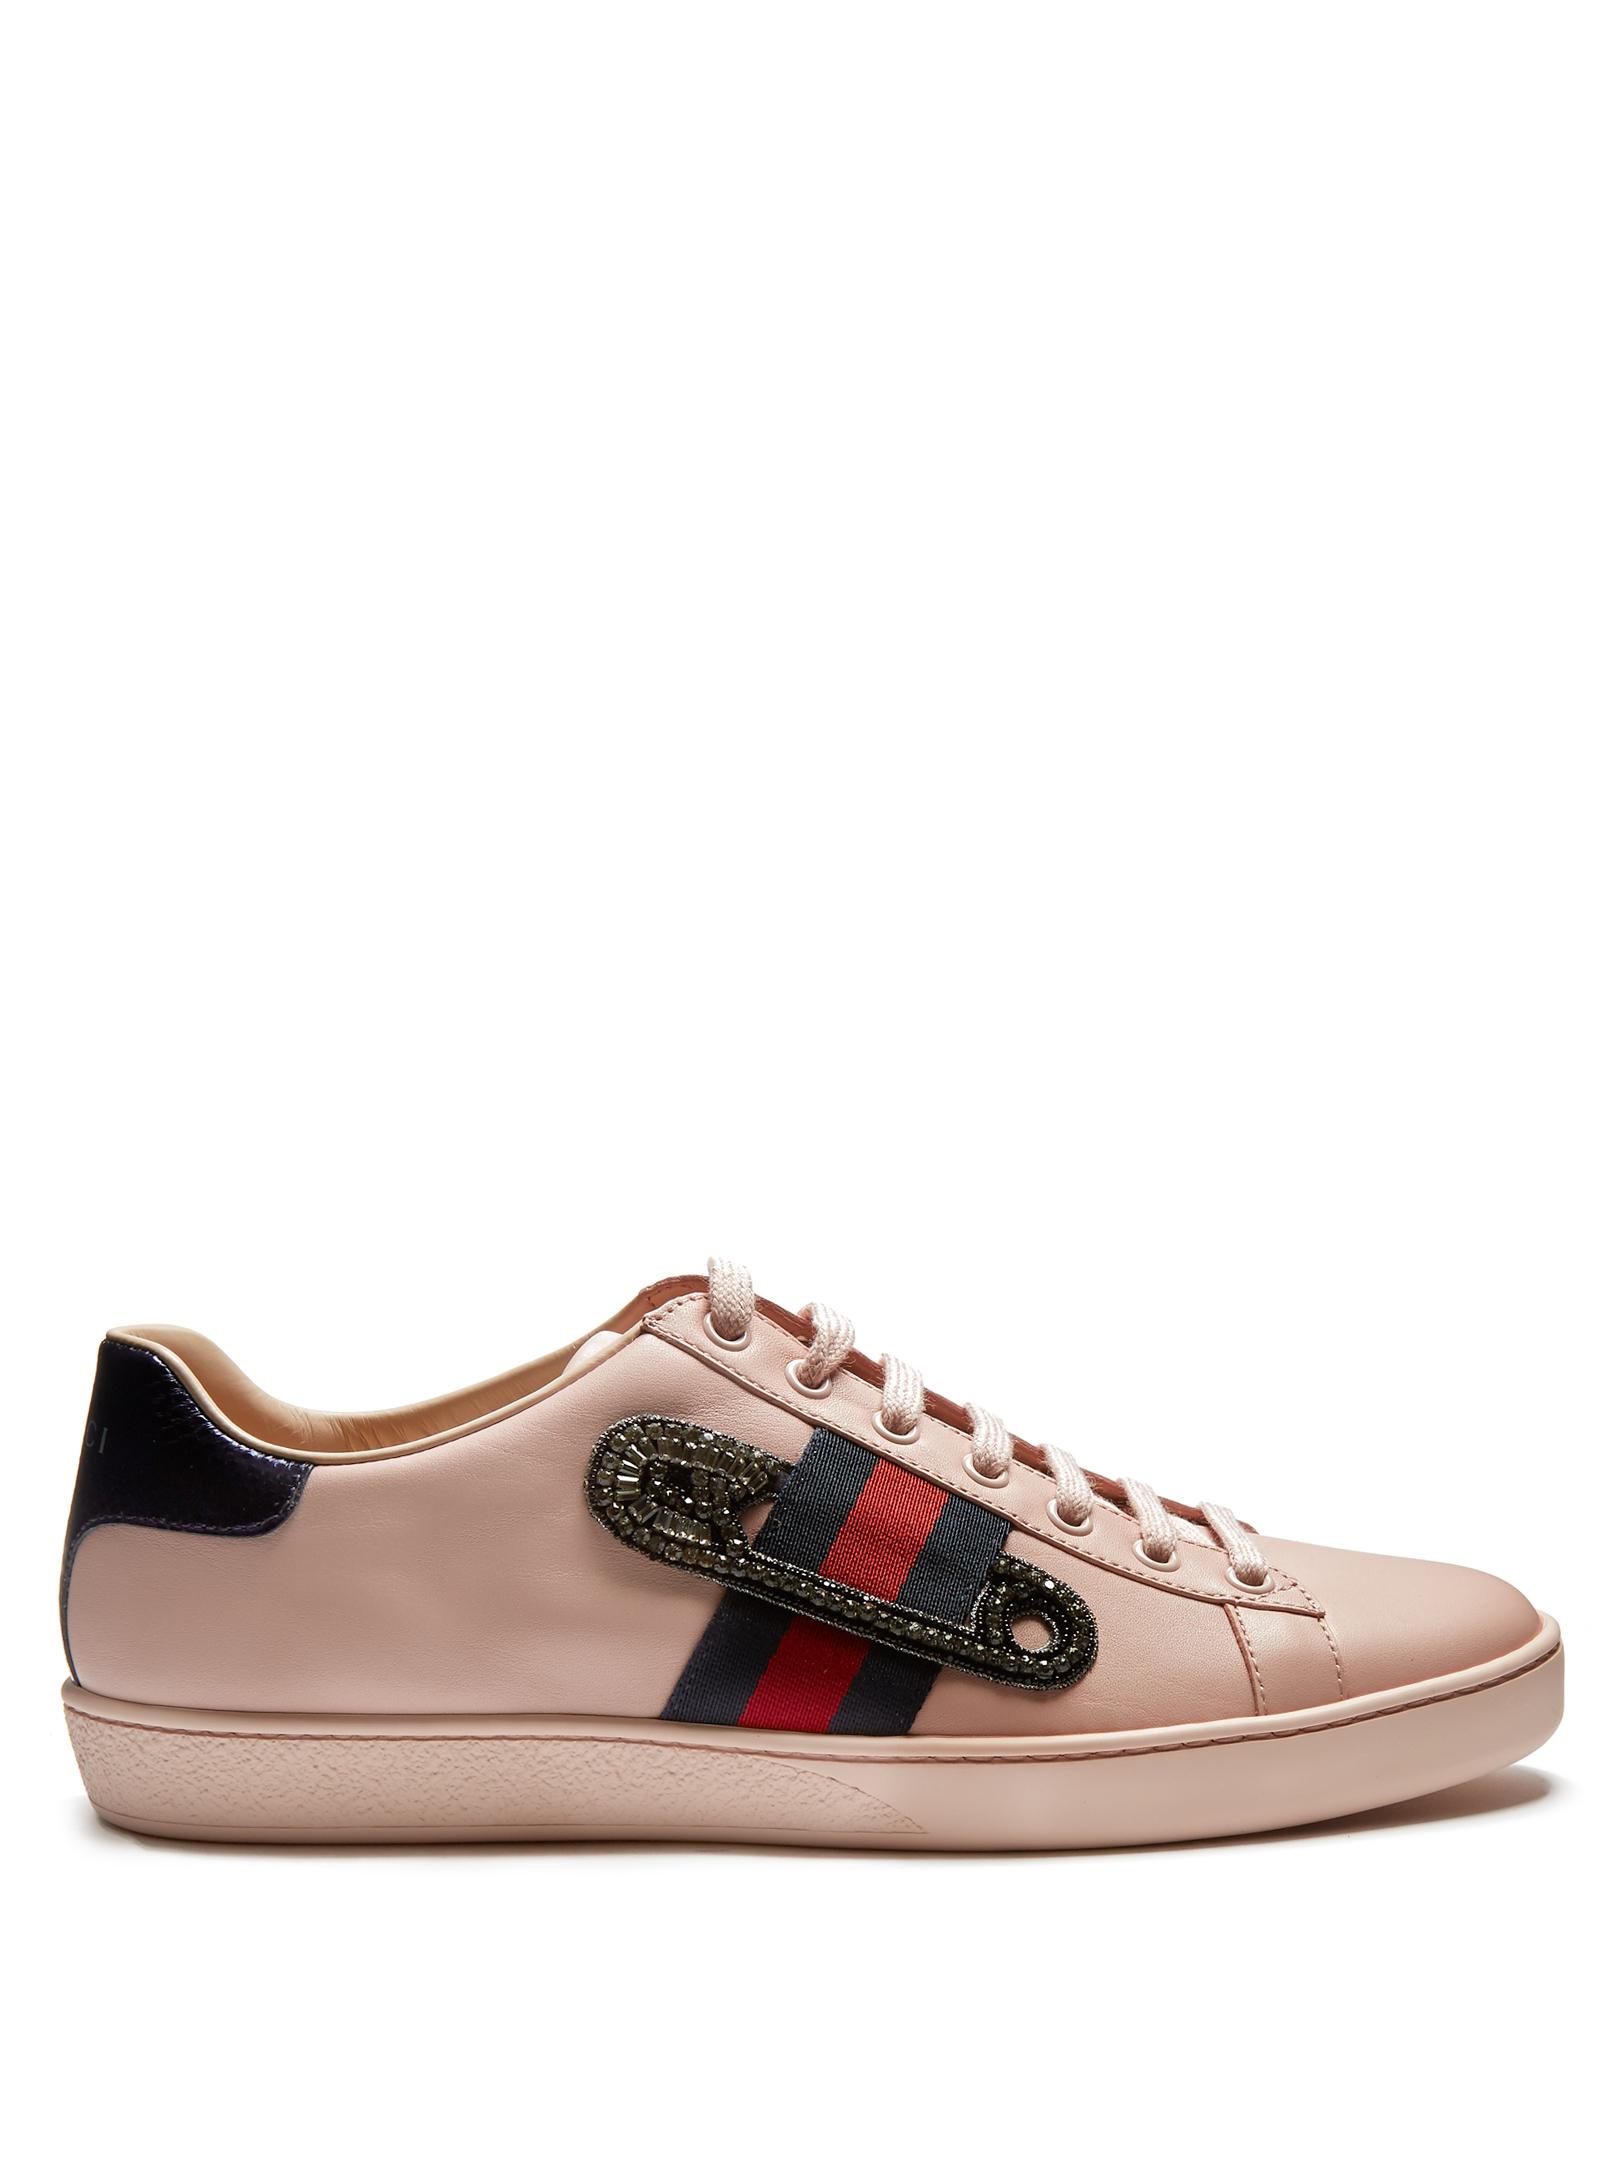 gucci safety pin sneakers